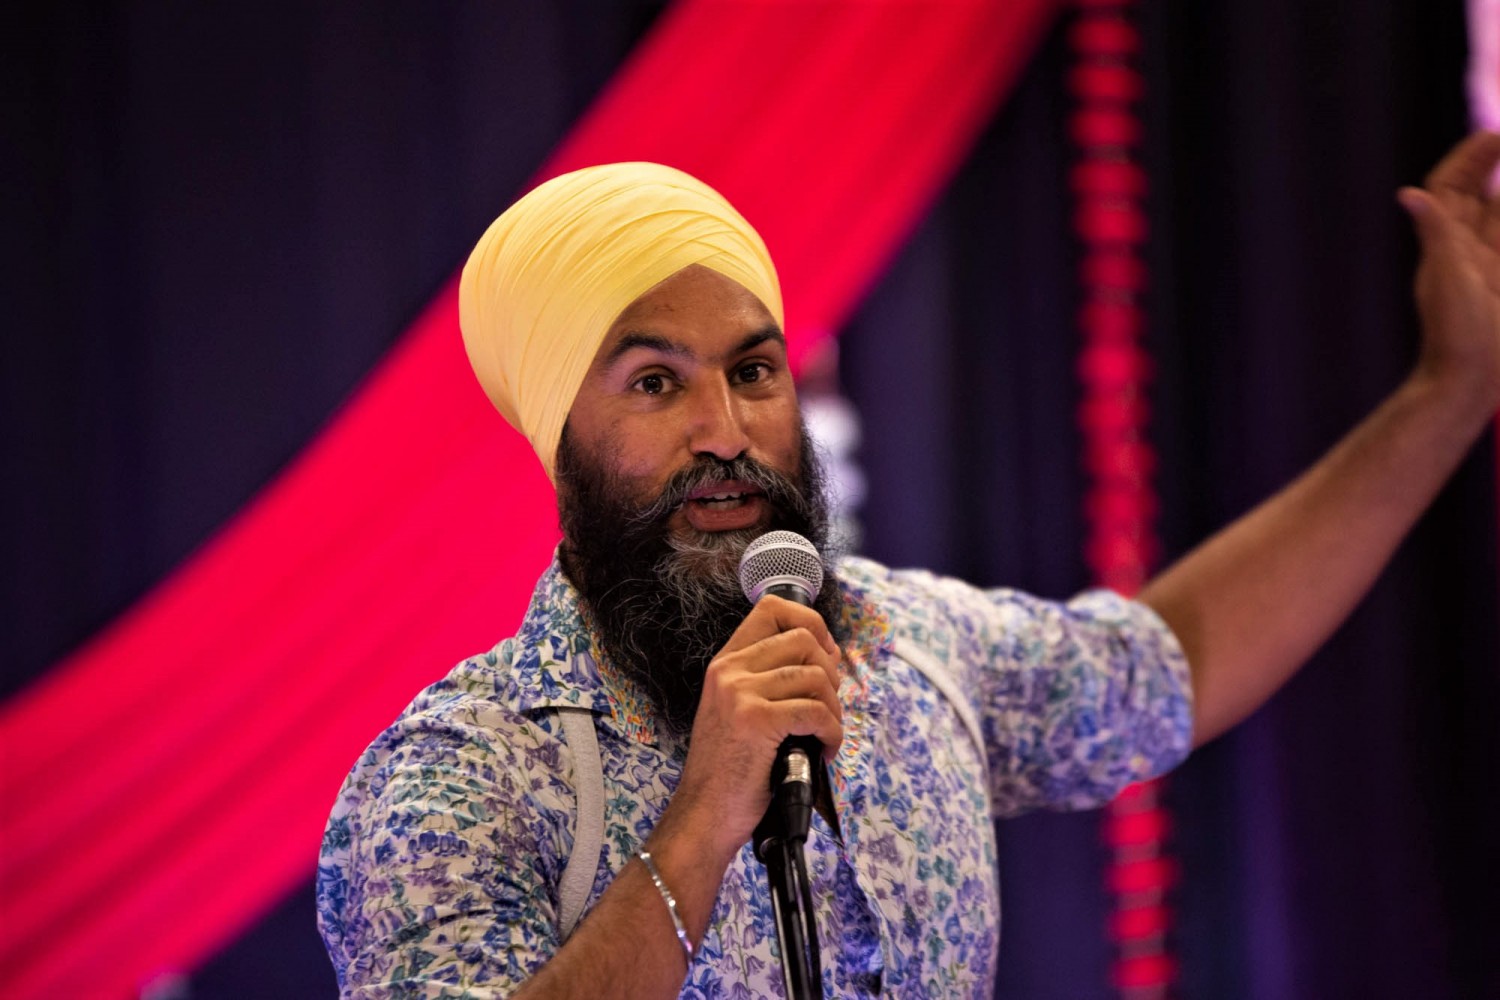 Jagmeet Singh pledges infrastructure funding to Mississauga, but Justin Trudeau and Andrew Scheer remain silent on the city’s wish list